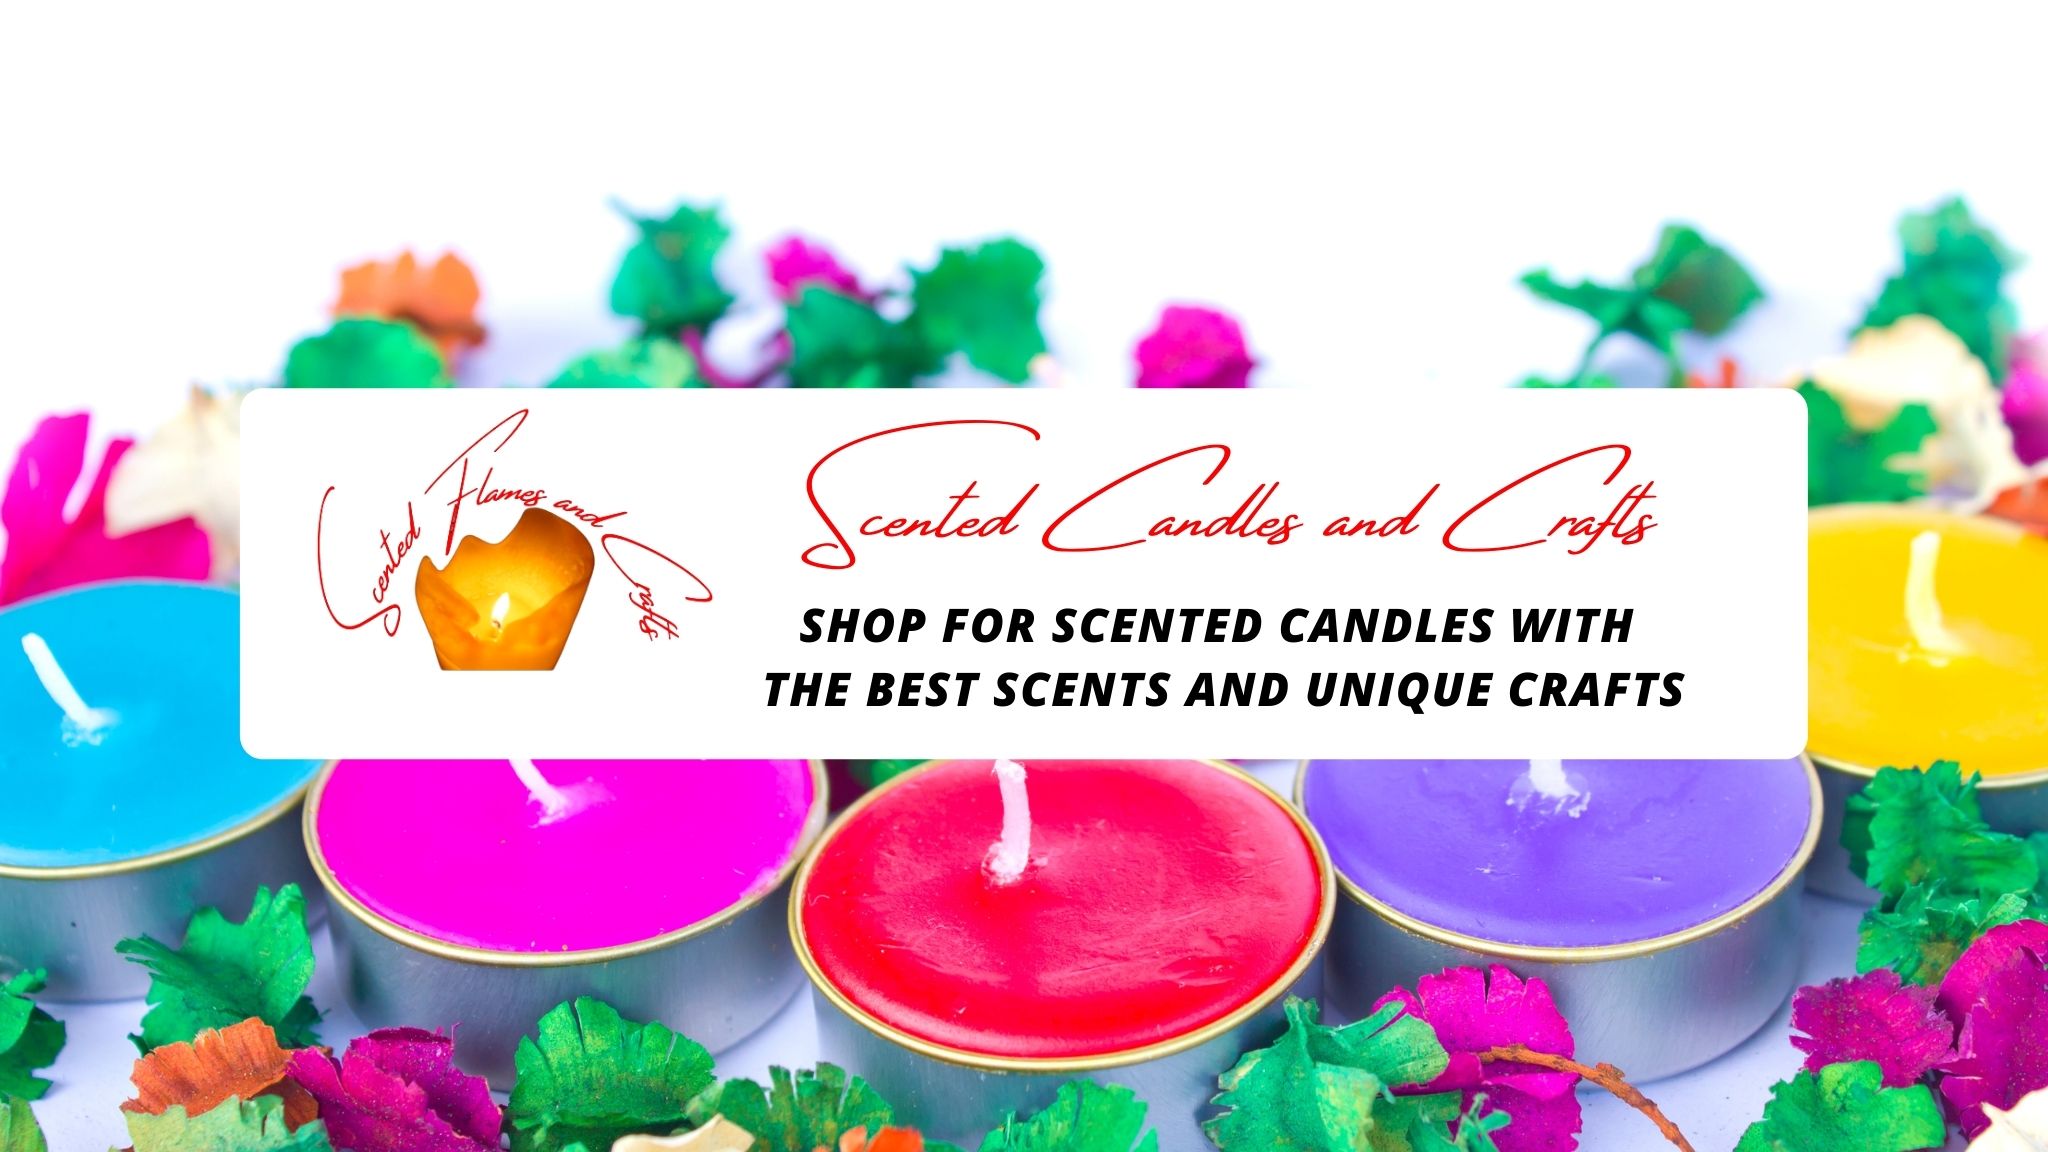 Shop Scented Candles, Bath Soaps, Bath and Body Care Supplies online